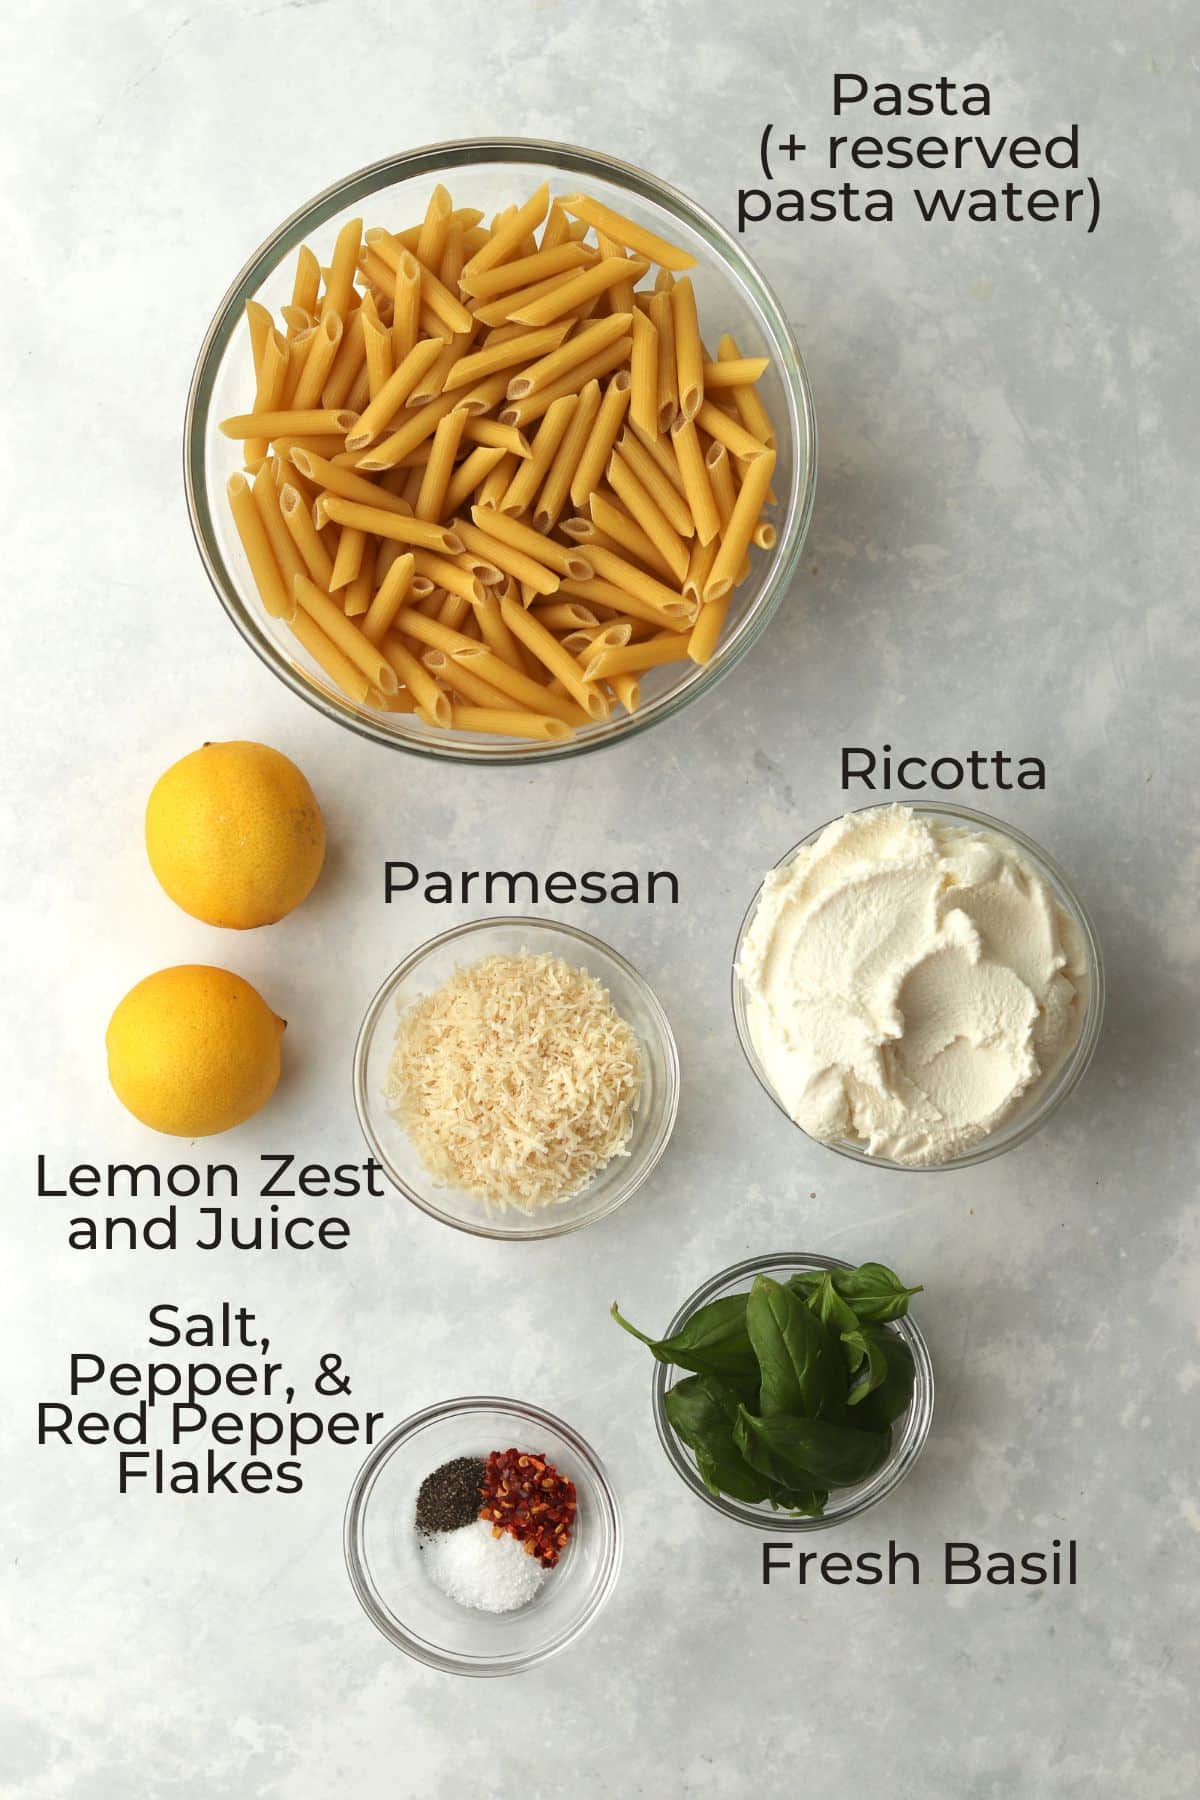 pasta, lemons, parmesan, ricotta, basil, and spices in glass bowls.